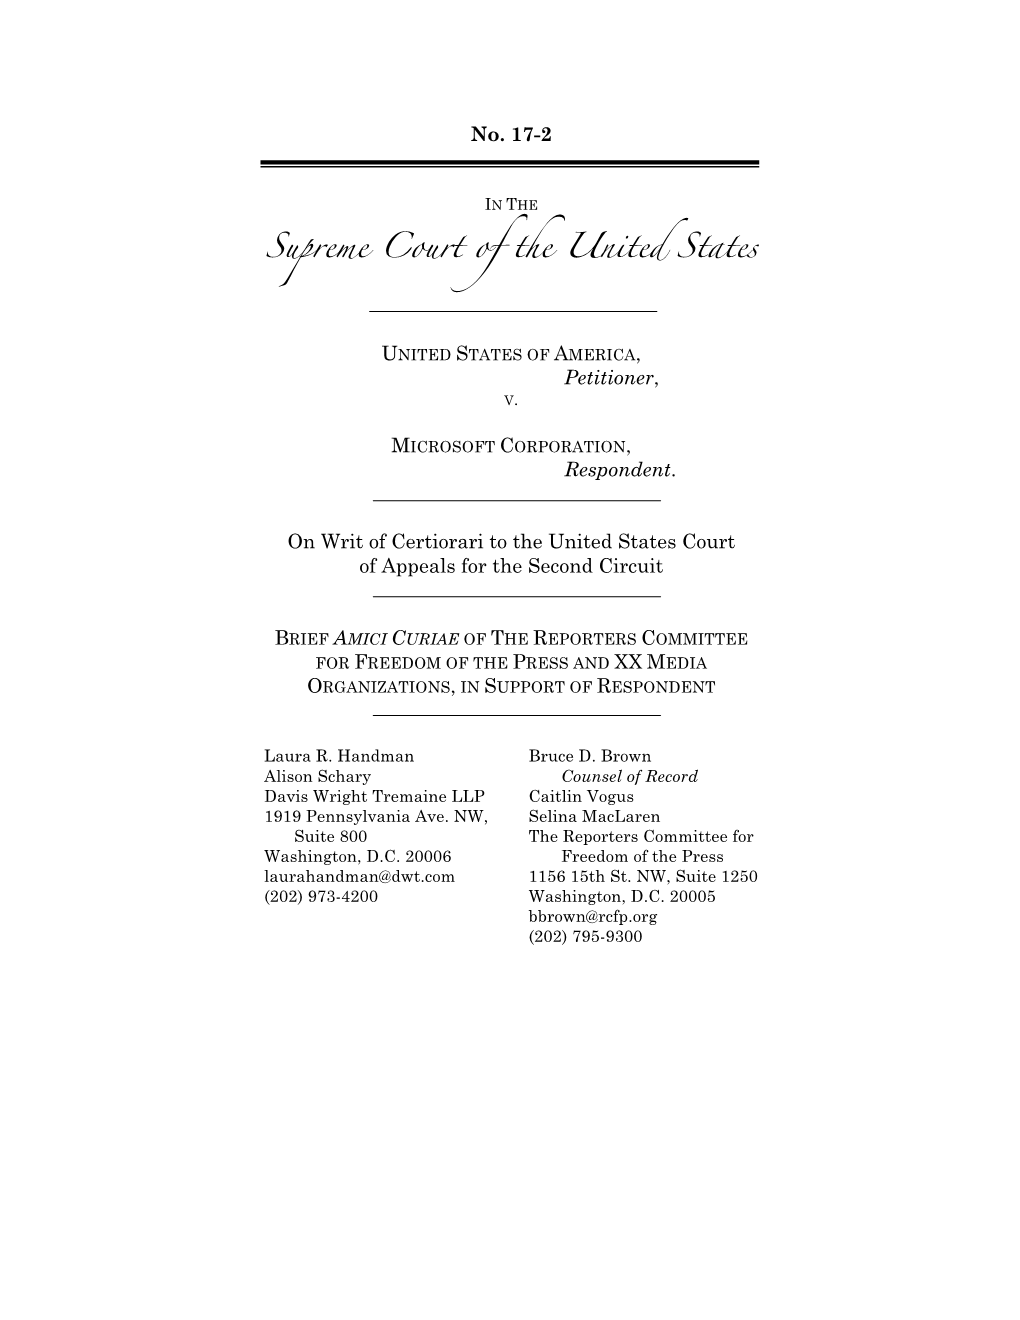 Microsoft Amicus Draft RCFP-DWT Final For